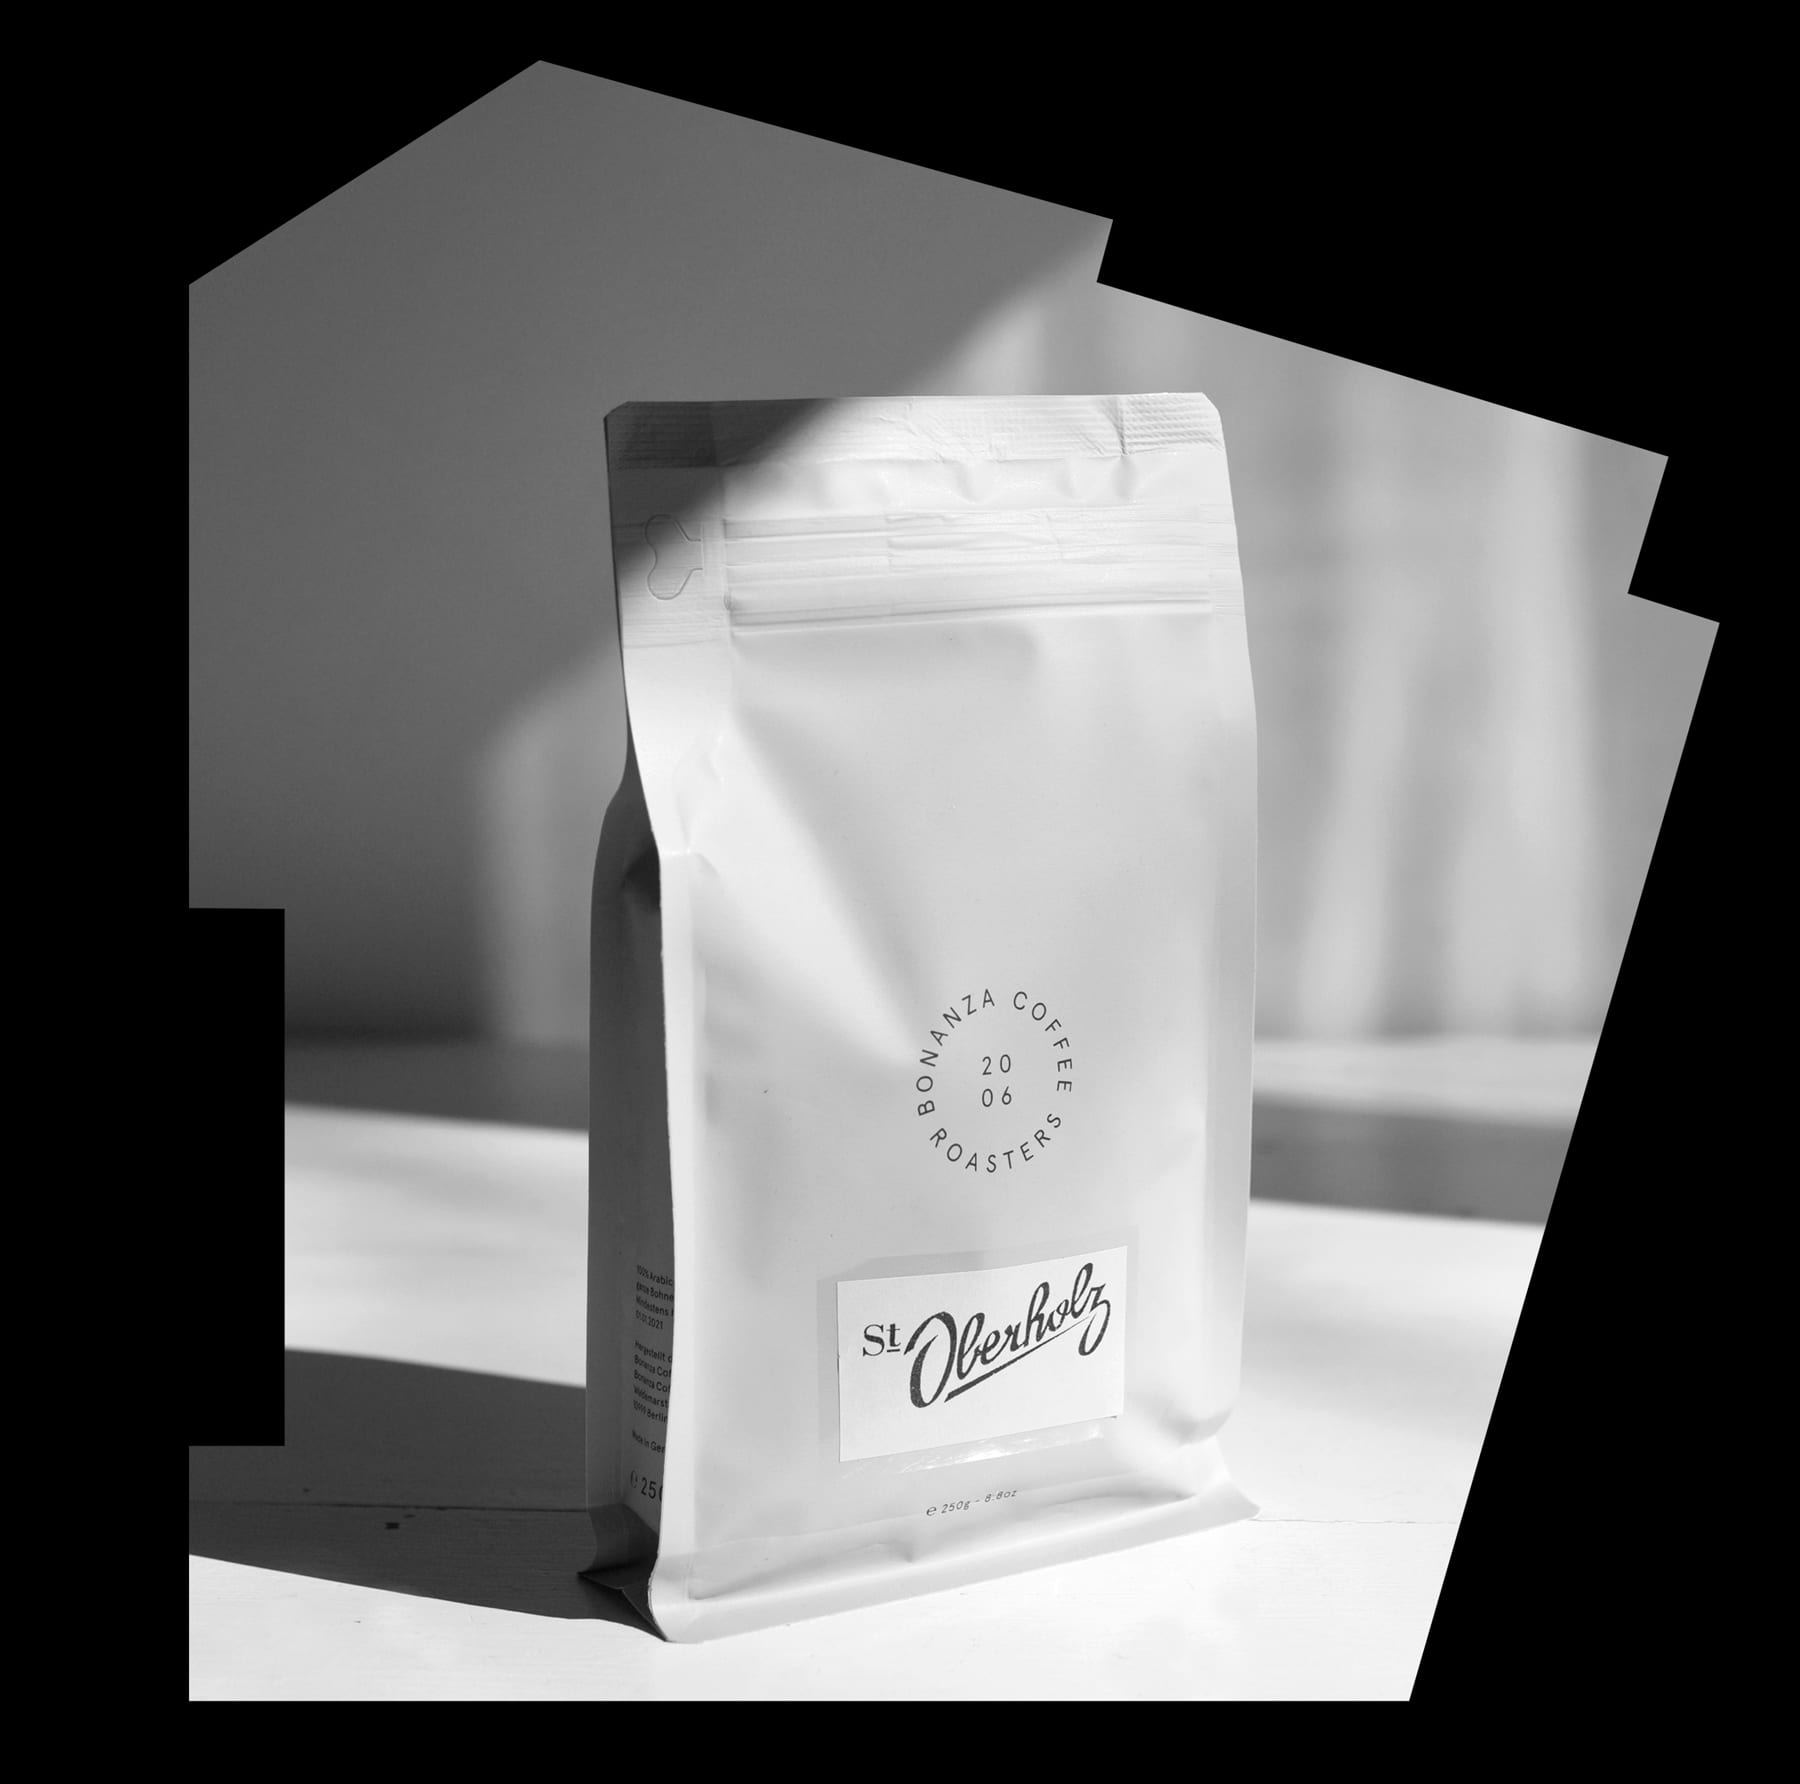 Get our St. Oberholz Signature Roast to enjoy at home